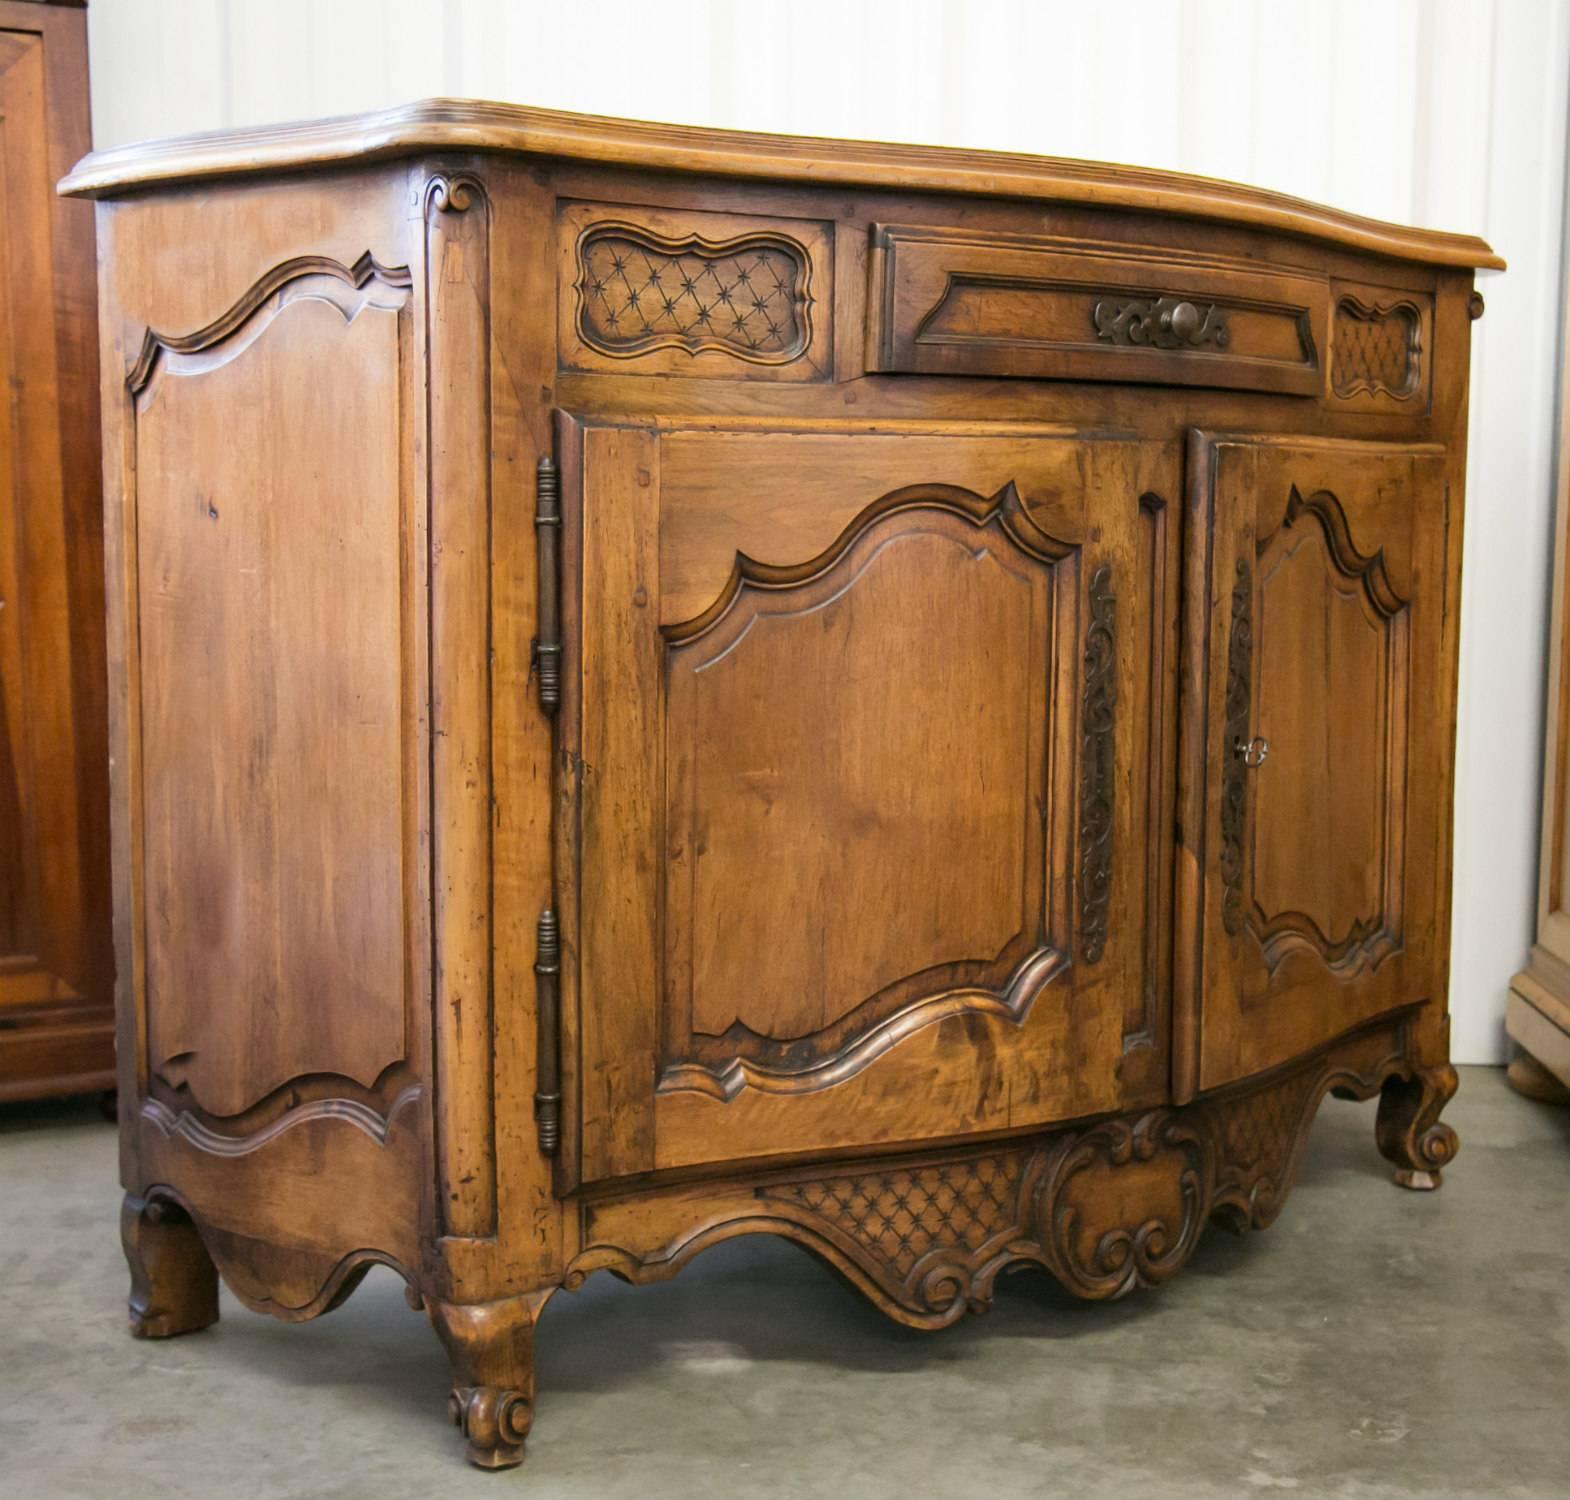 A fine 19th century Louis XV style Provençal buffet of solid walnut having a moulded serpentine top over a center drawer flanked by beautiful carved cross hatch panels all above two moulded paneled doors with carved C-scrolls ending in volutes. The